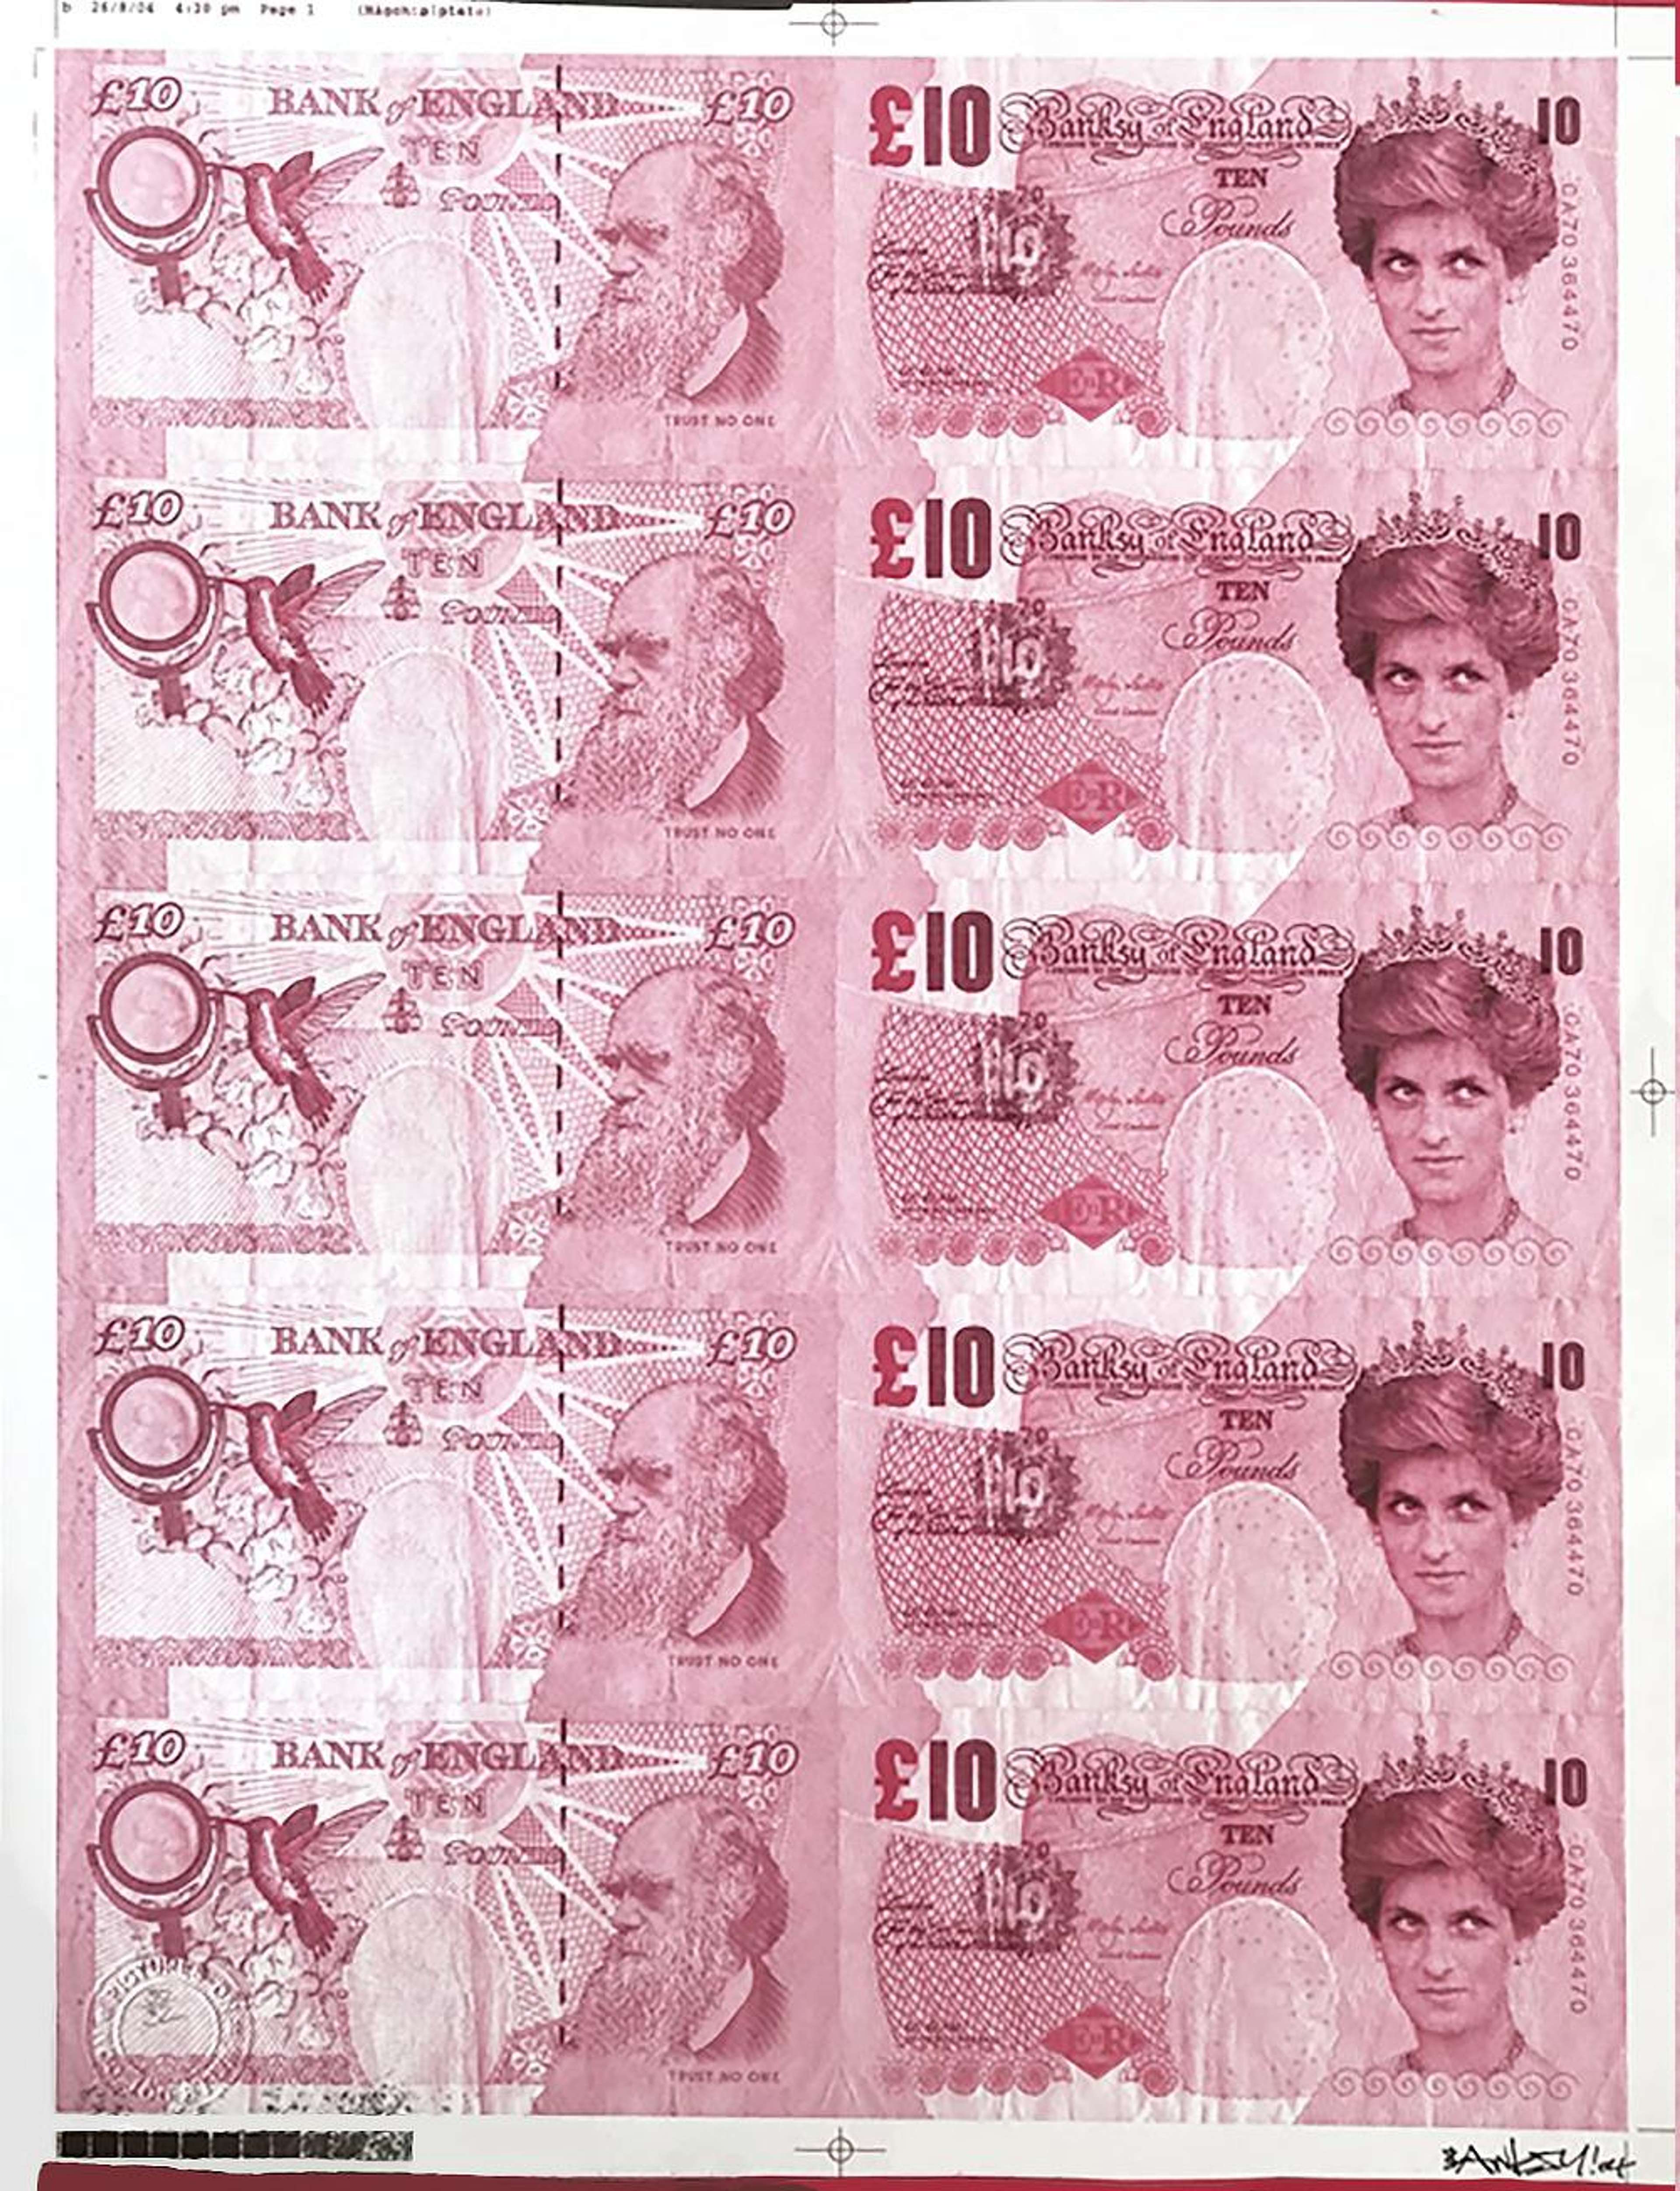 Di-Faced Tenners by Banksy